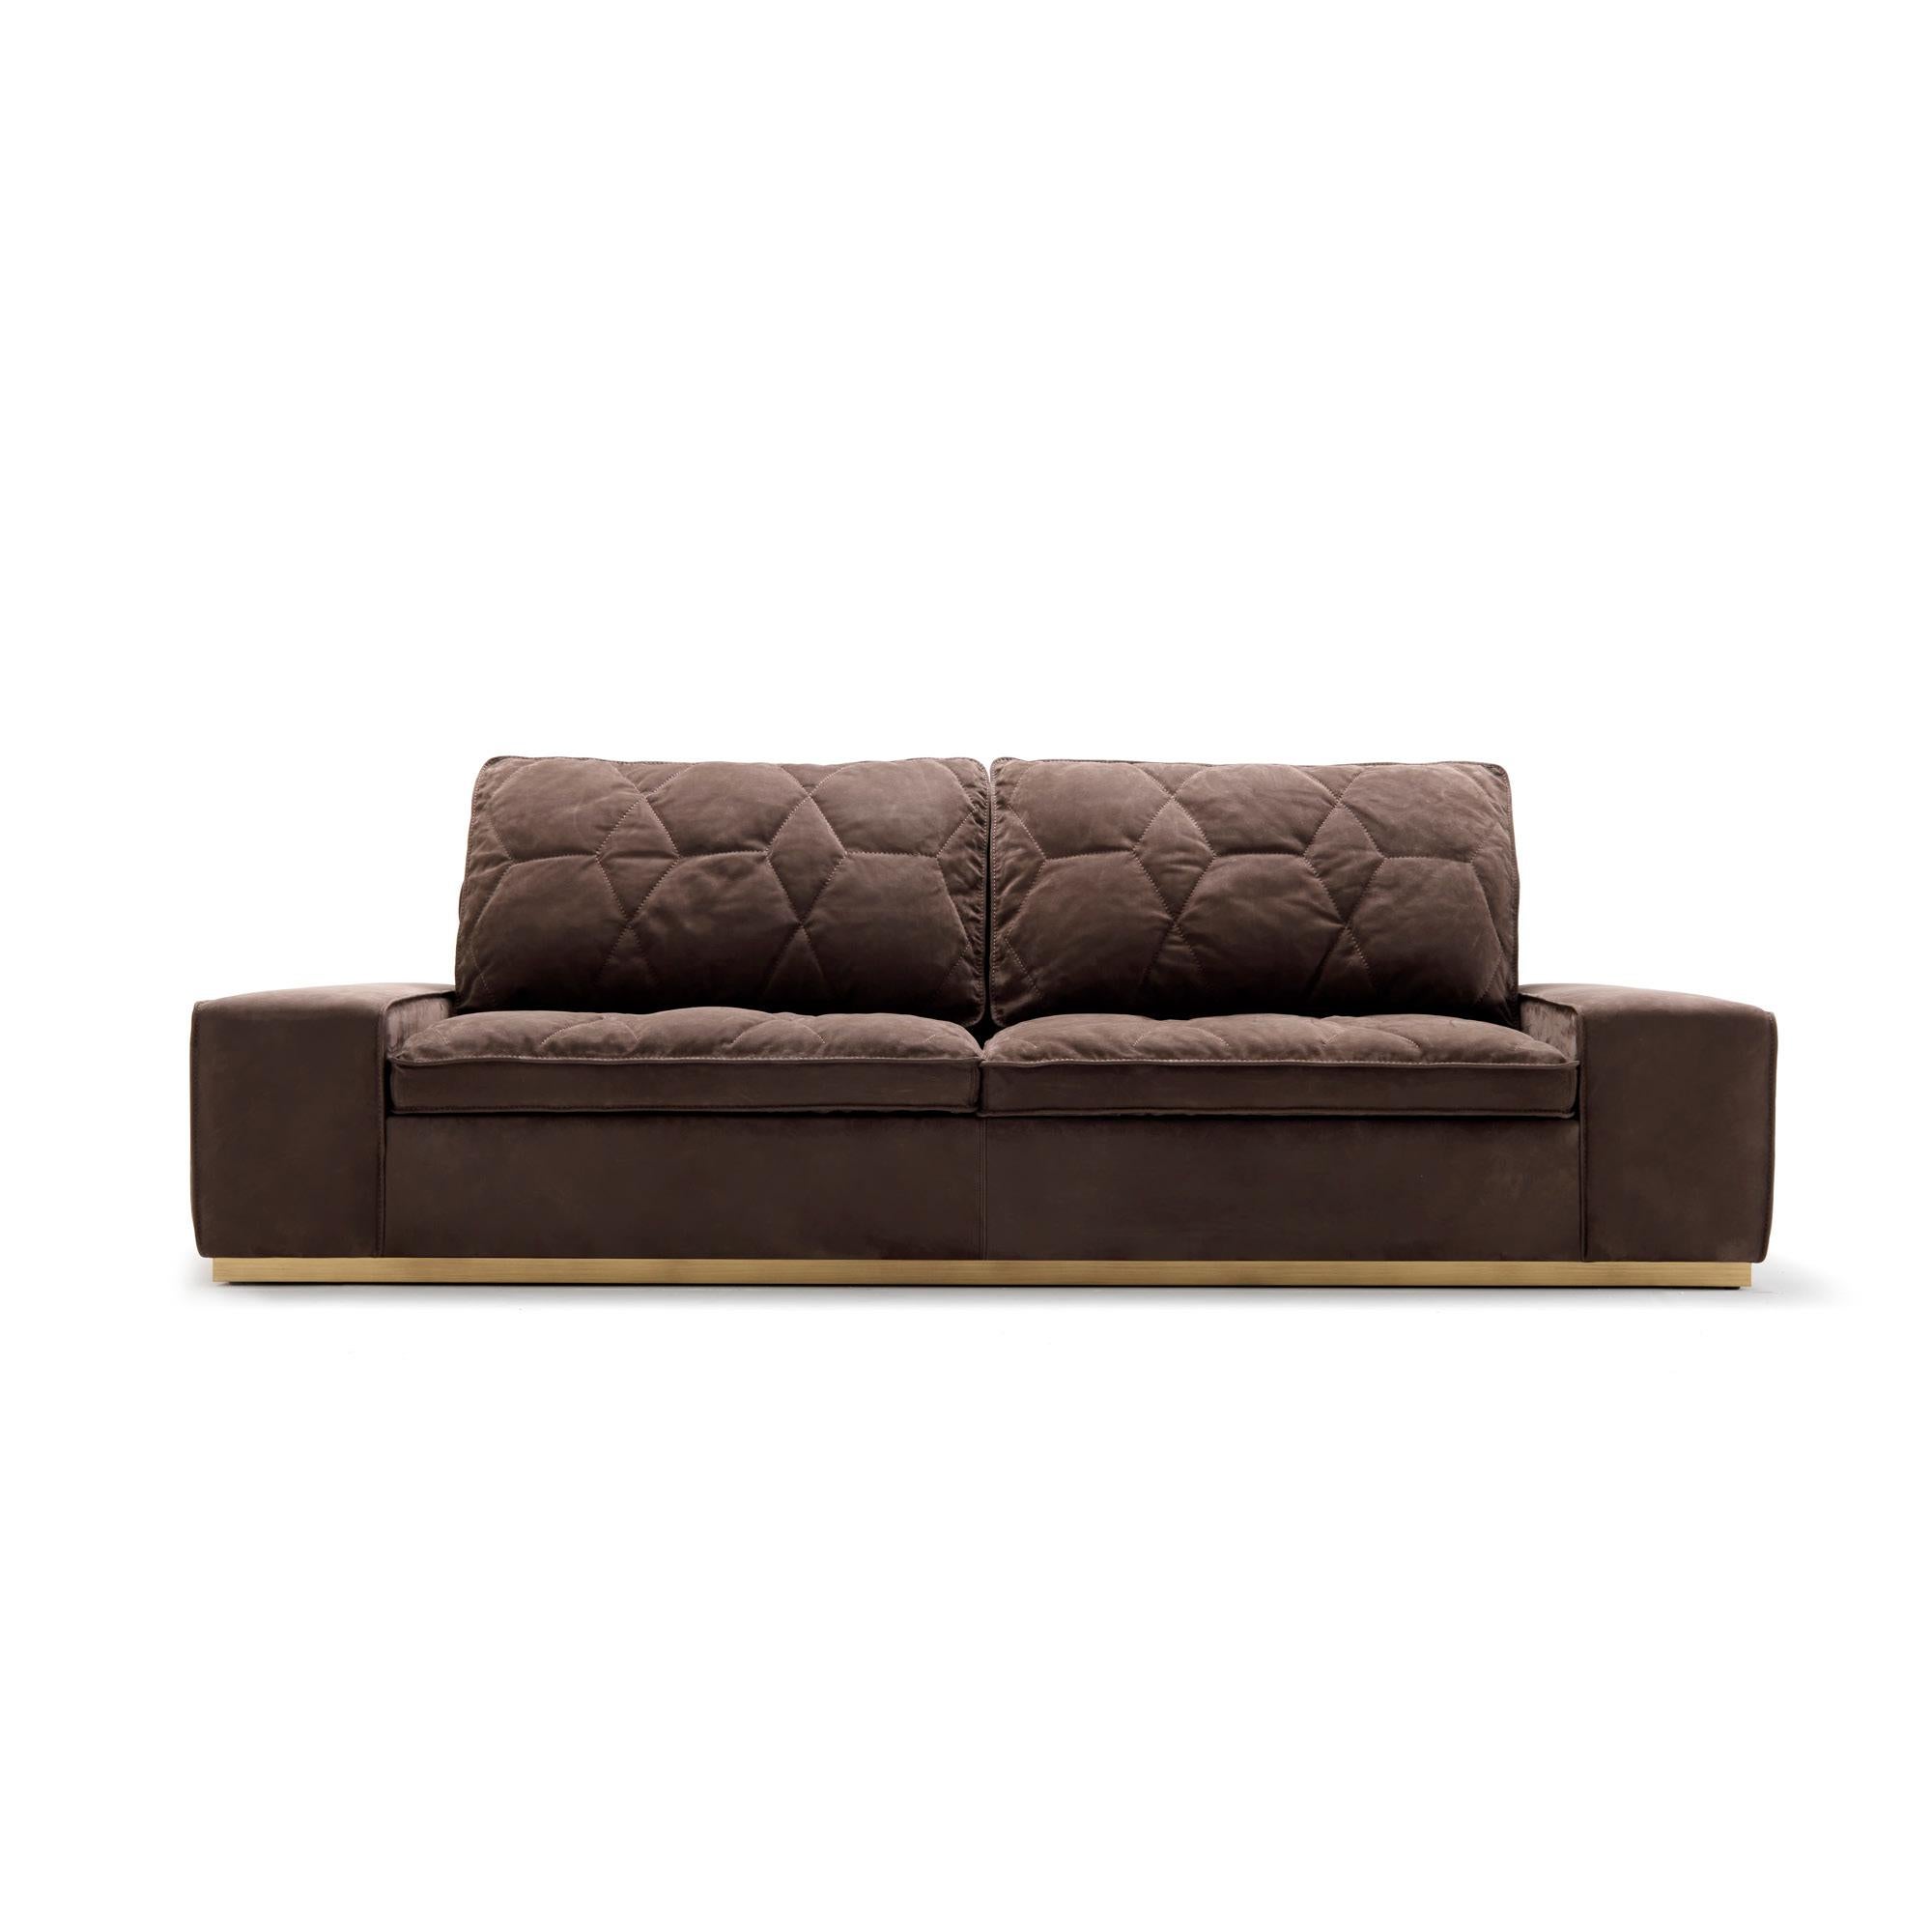 Product Technical Sheet:
Internal structure:
Fir wood multi-ply.
Cushions padding :
Sitting cushions :
External padding with natural , sterilized goose feathers.
Internal center with memory foam and expanded polyurethane with